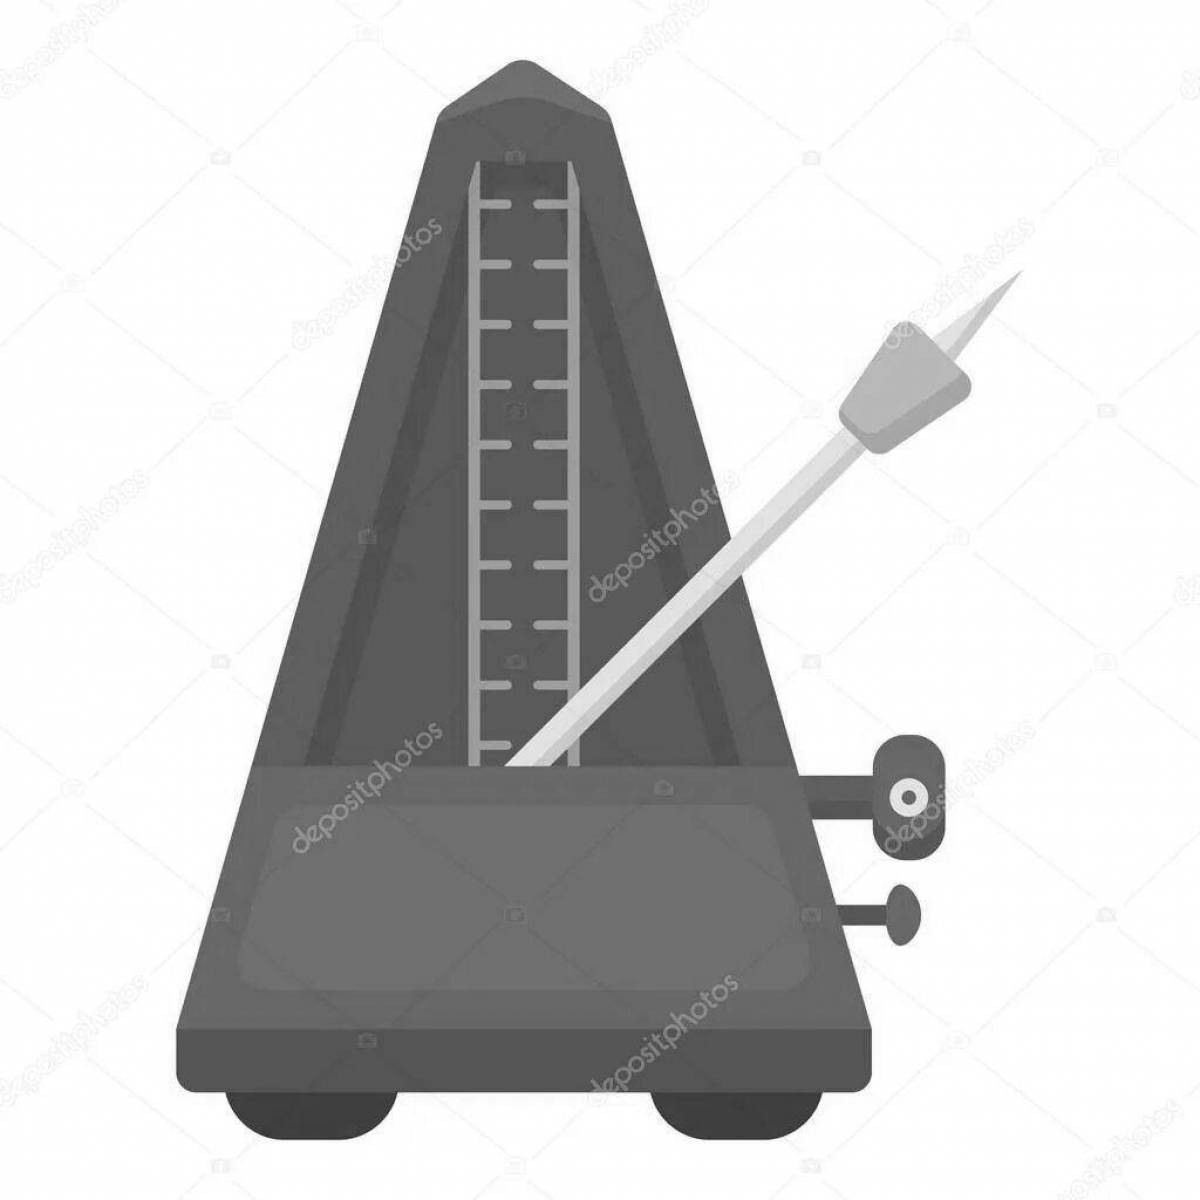 Crazy metronome coloring page